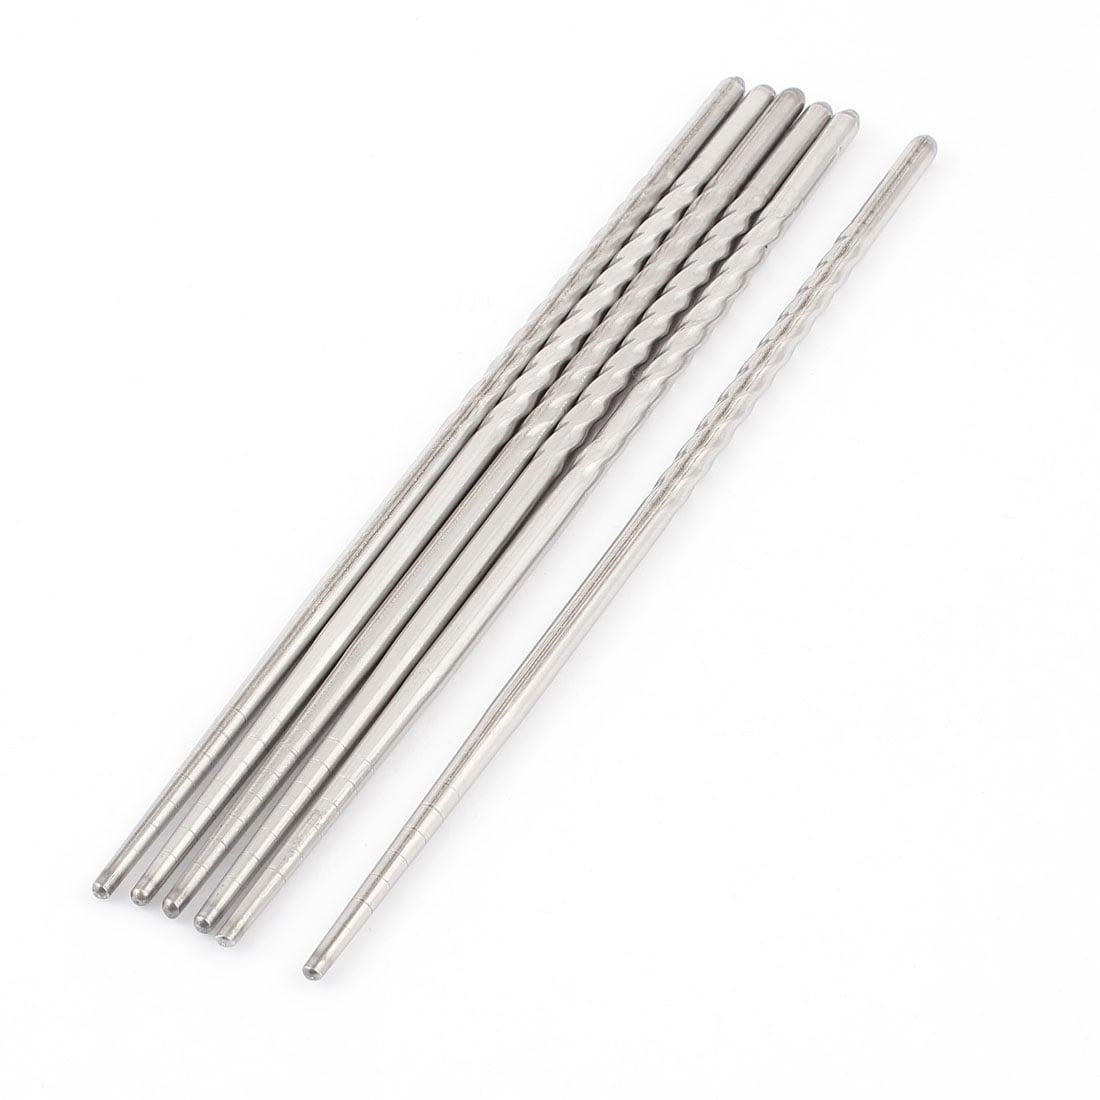 Home Kitchen Stainless Steel Tableware Chopsticks Silver Tone 2 Pairs 